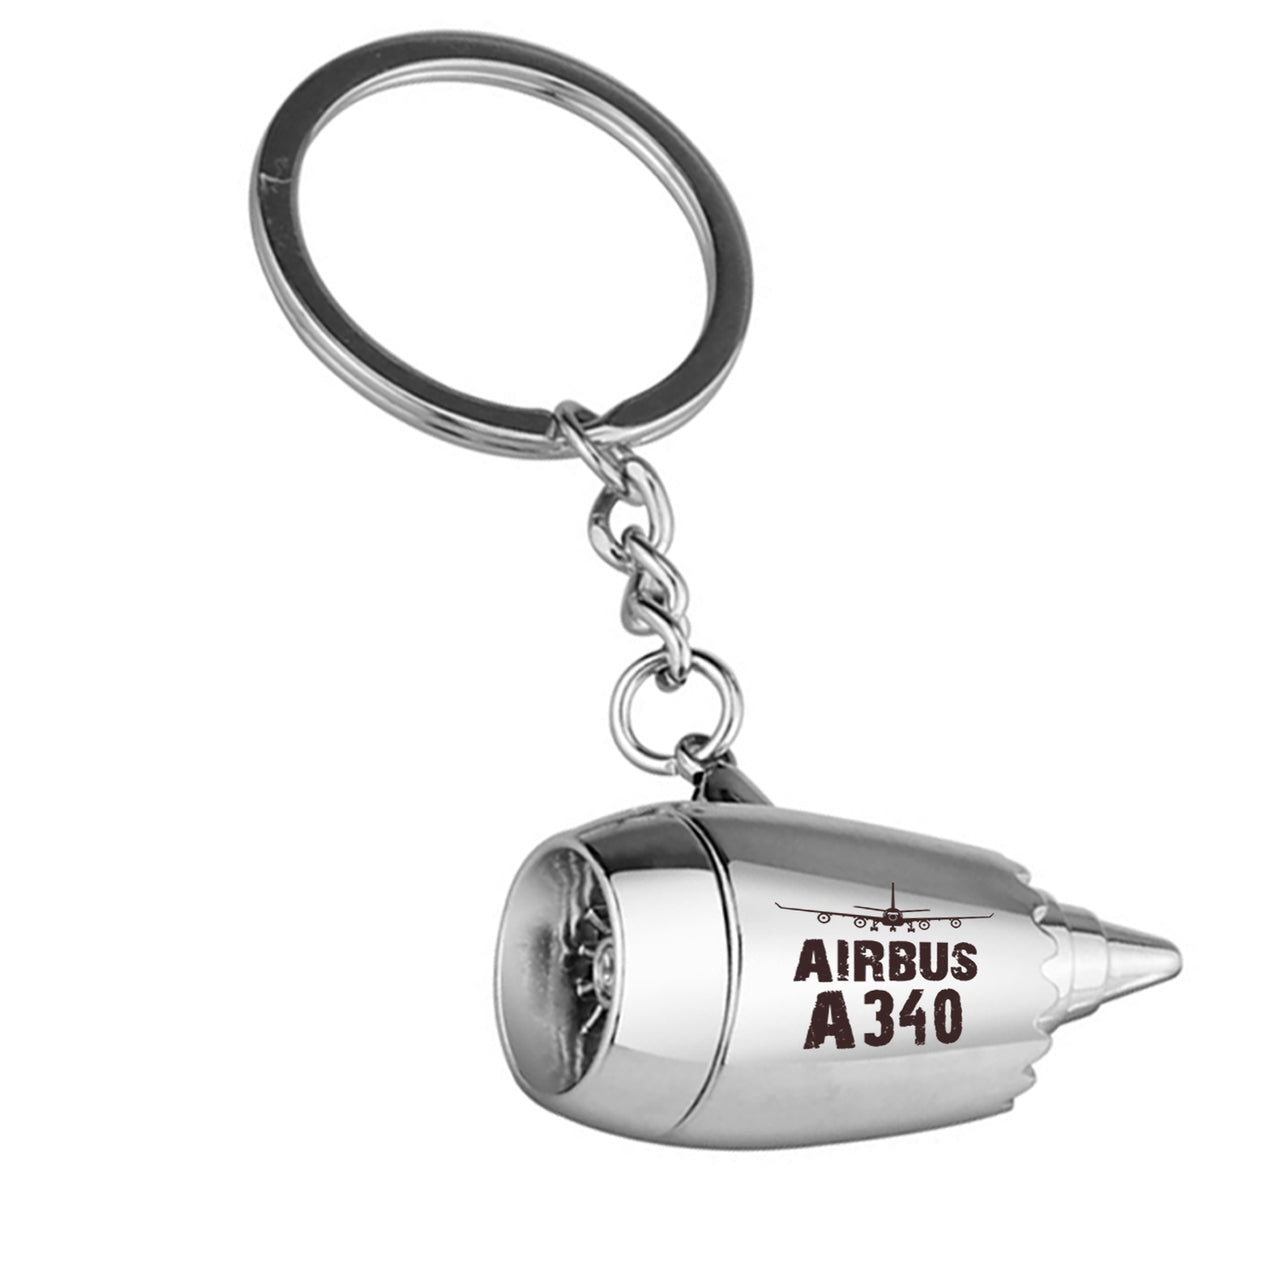 Airbus A340 & Plane Designed Airplane Jet Engine Shaped Key Chain